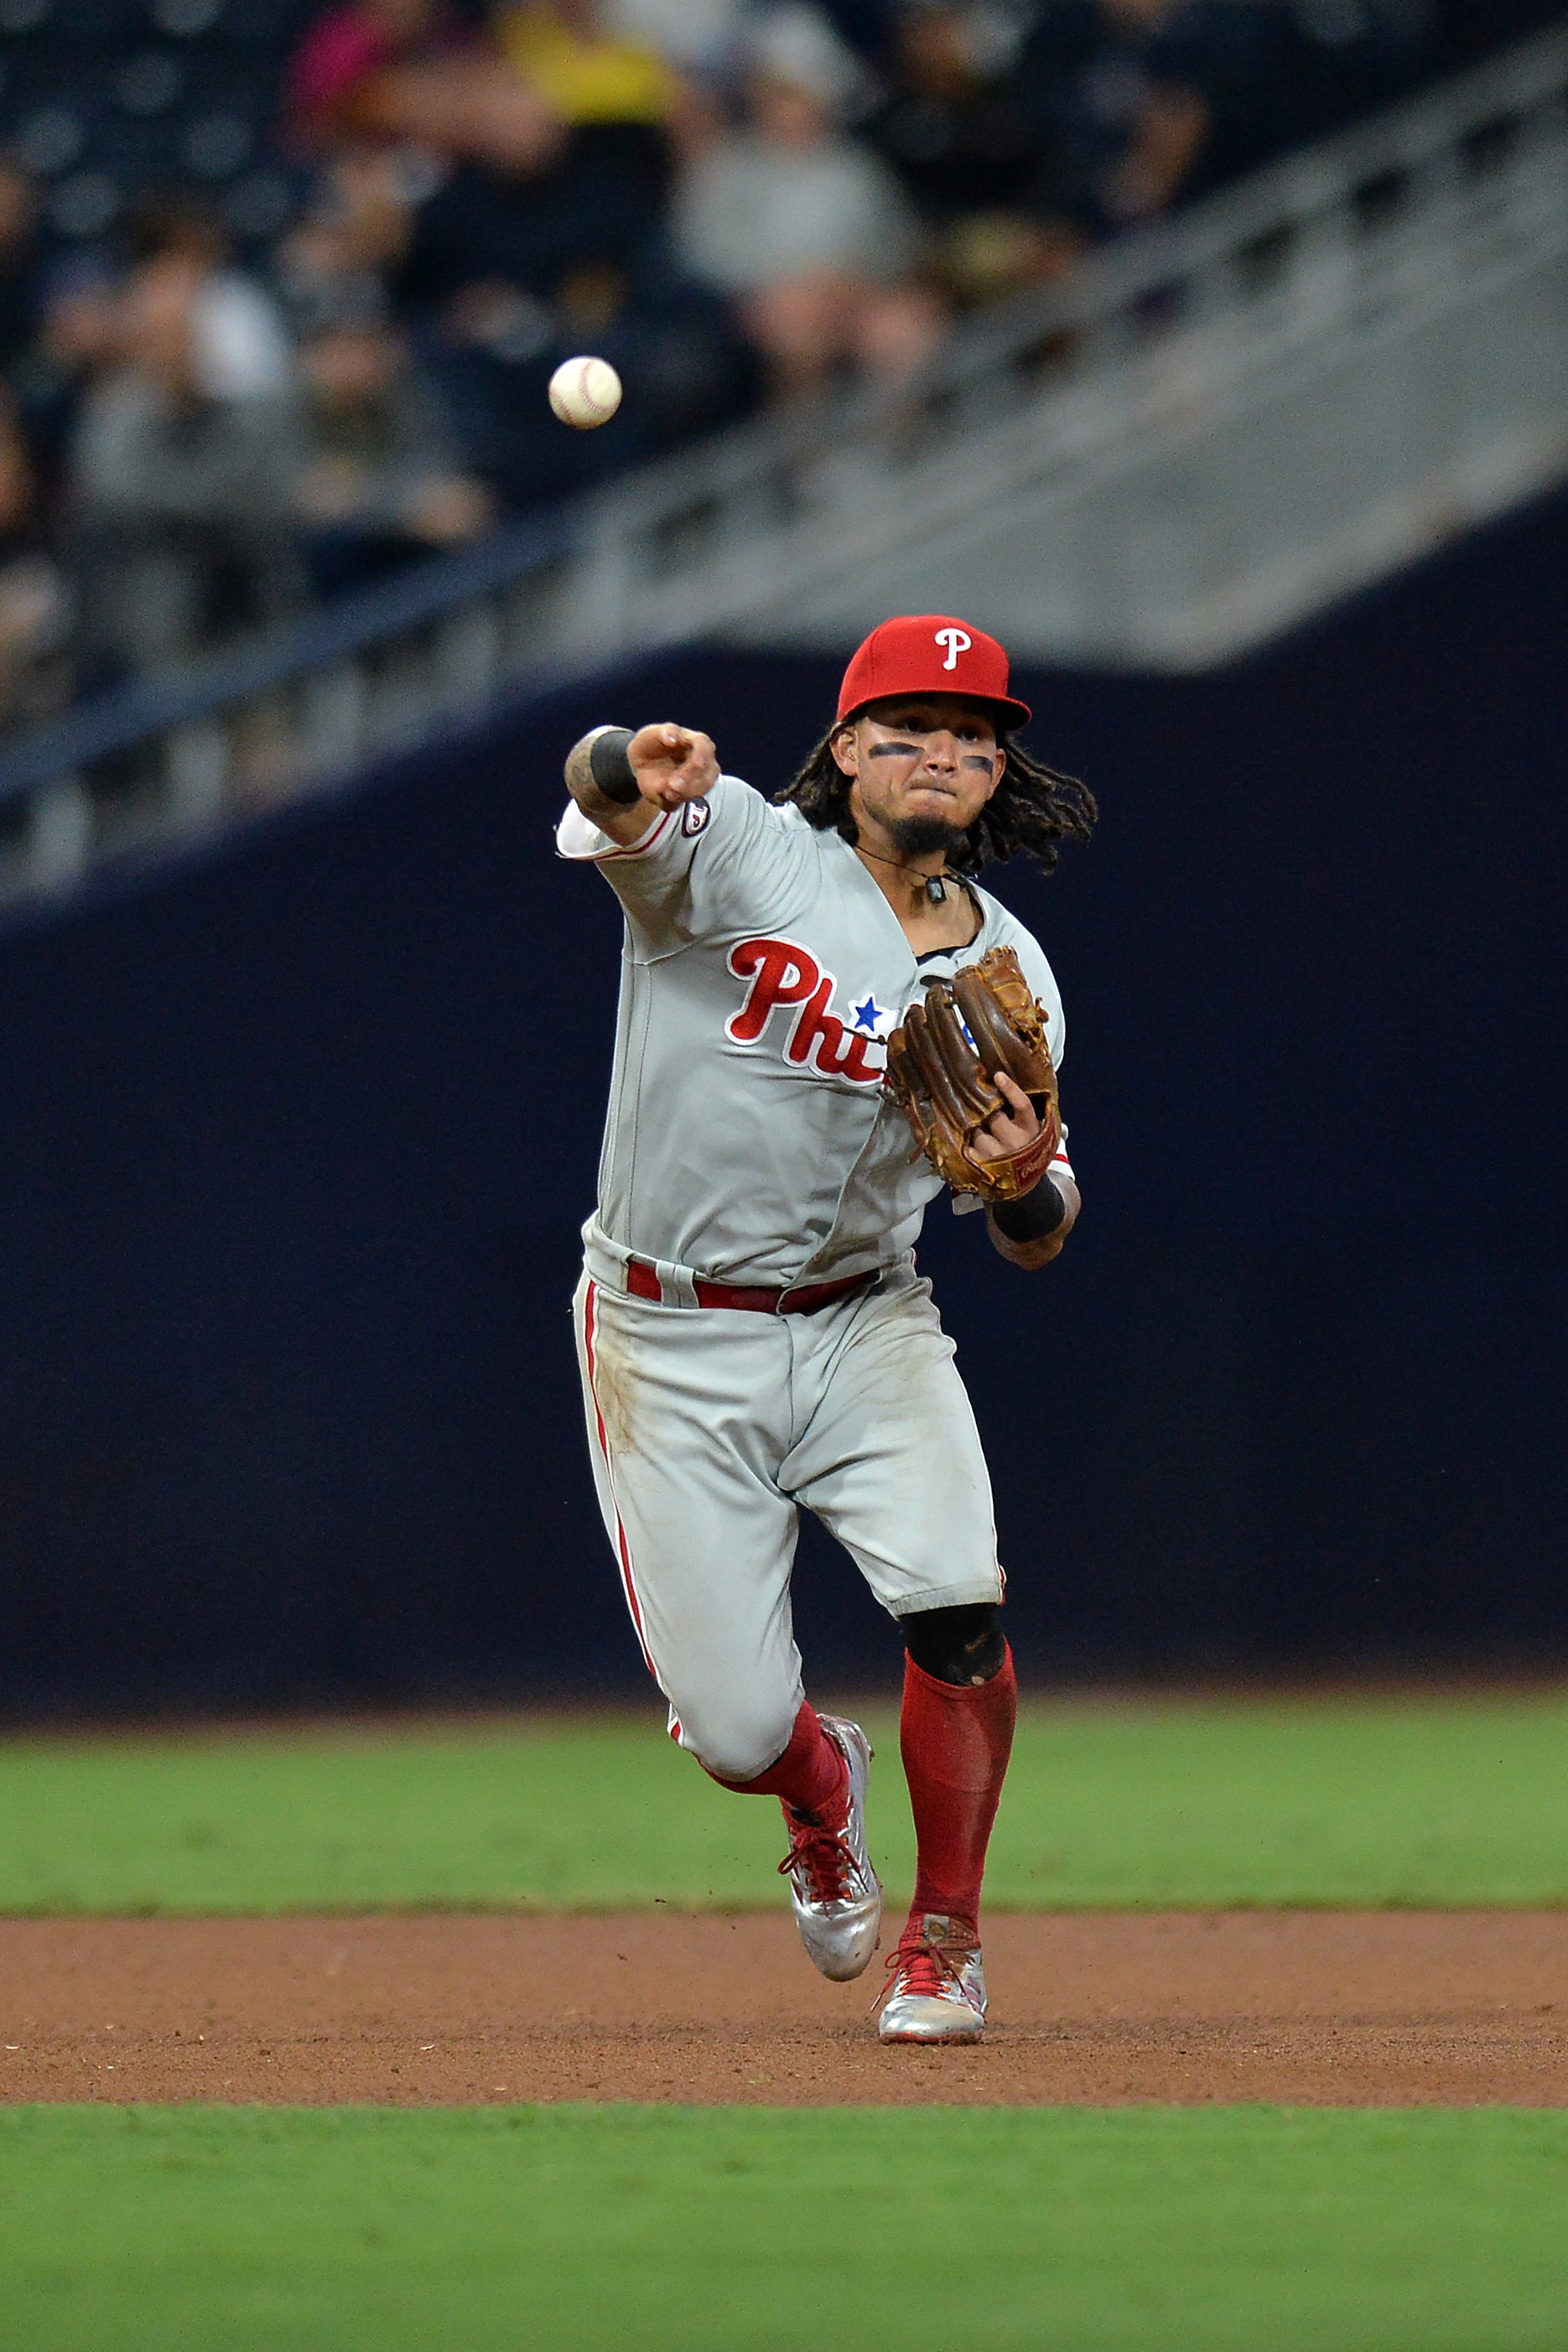 Frank: As Phillies continue their power hitting, Scott Kingery's chances to  play are rare